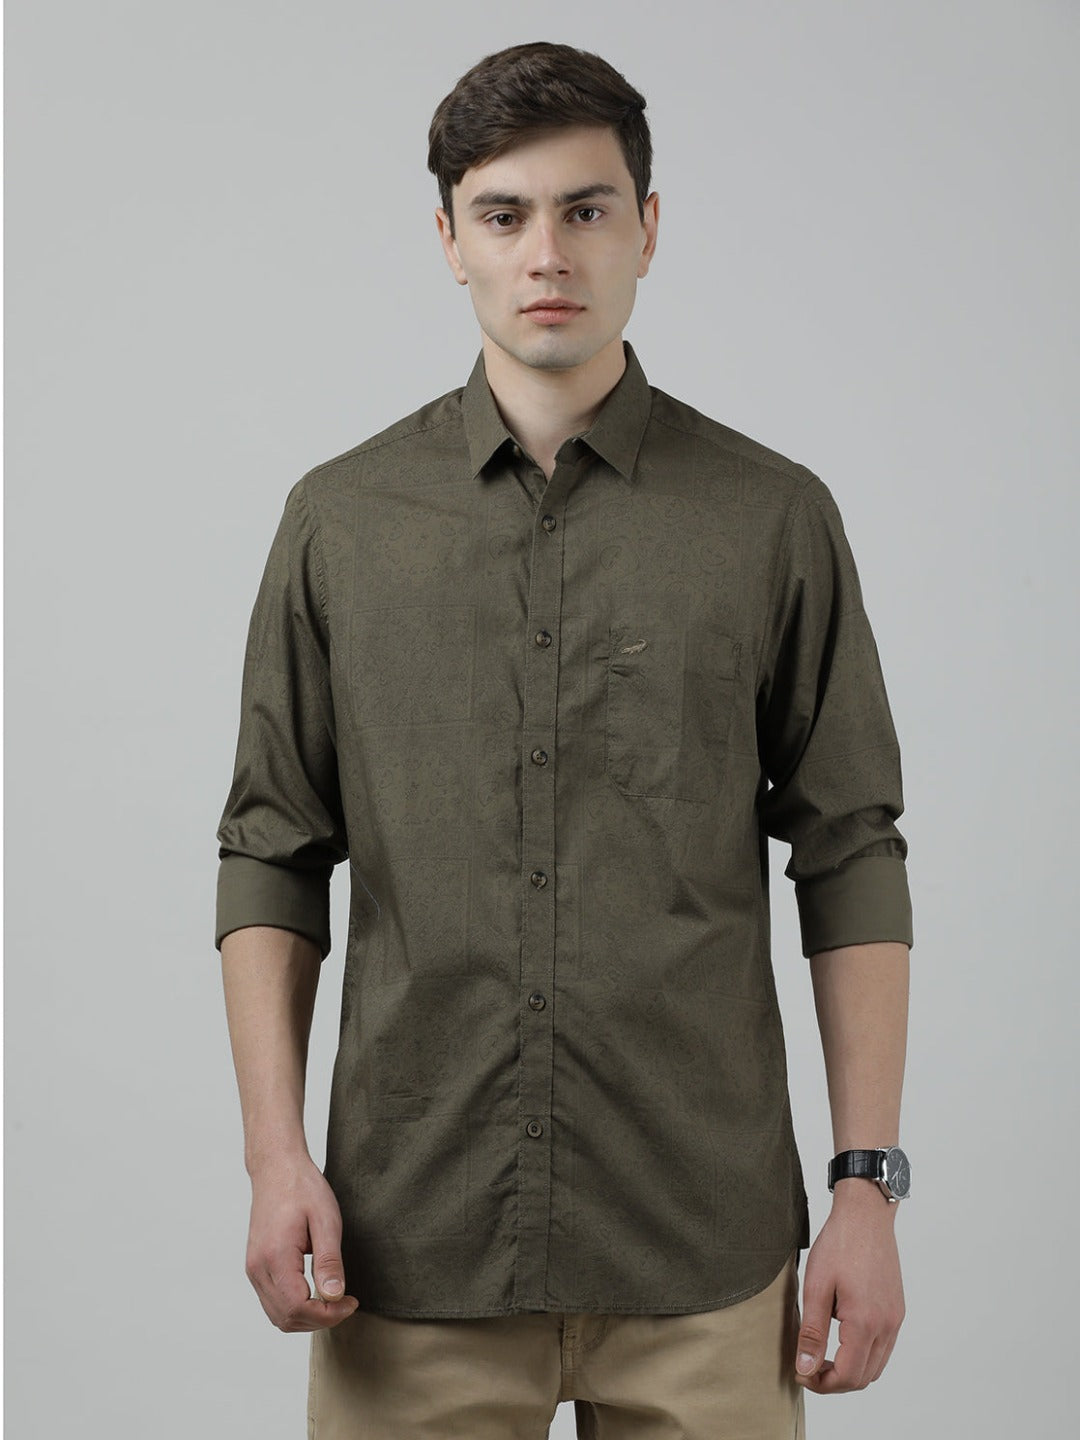 Casual Green Full Sleeve Comfort Fit Printed Shirt with Collar for Men